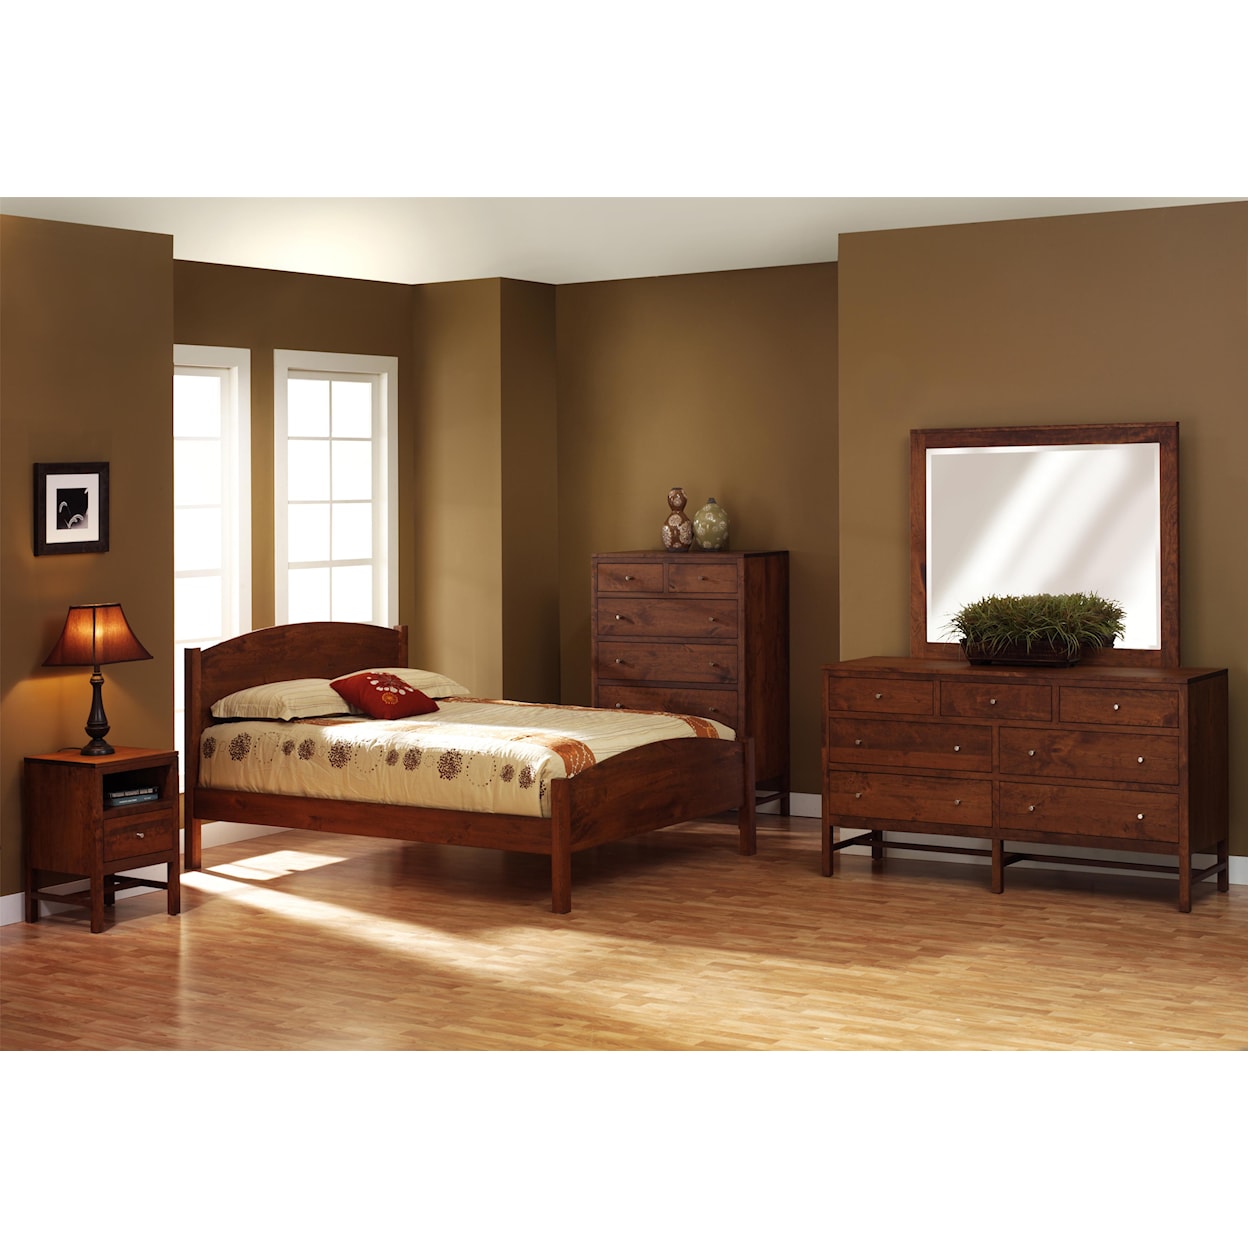 Millcraft Lynnwood Queen Eclipse Bed